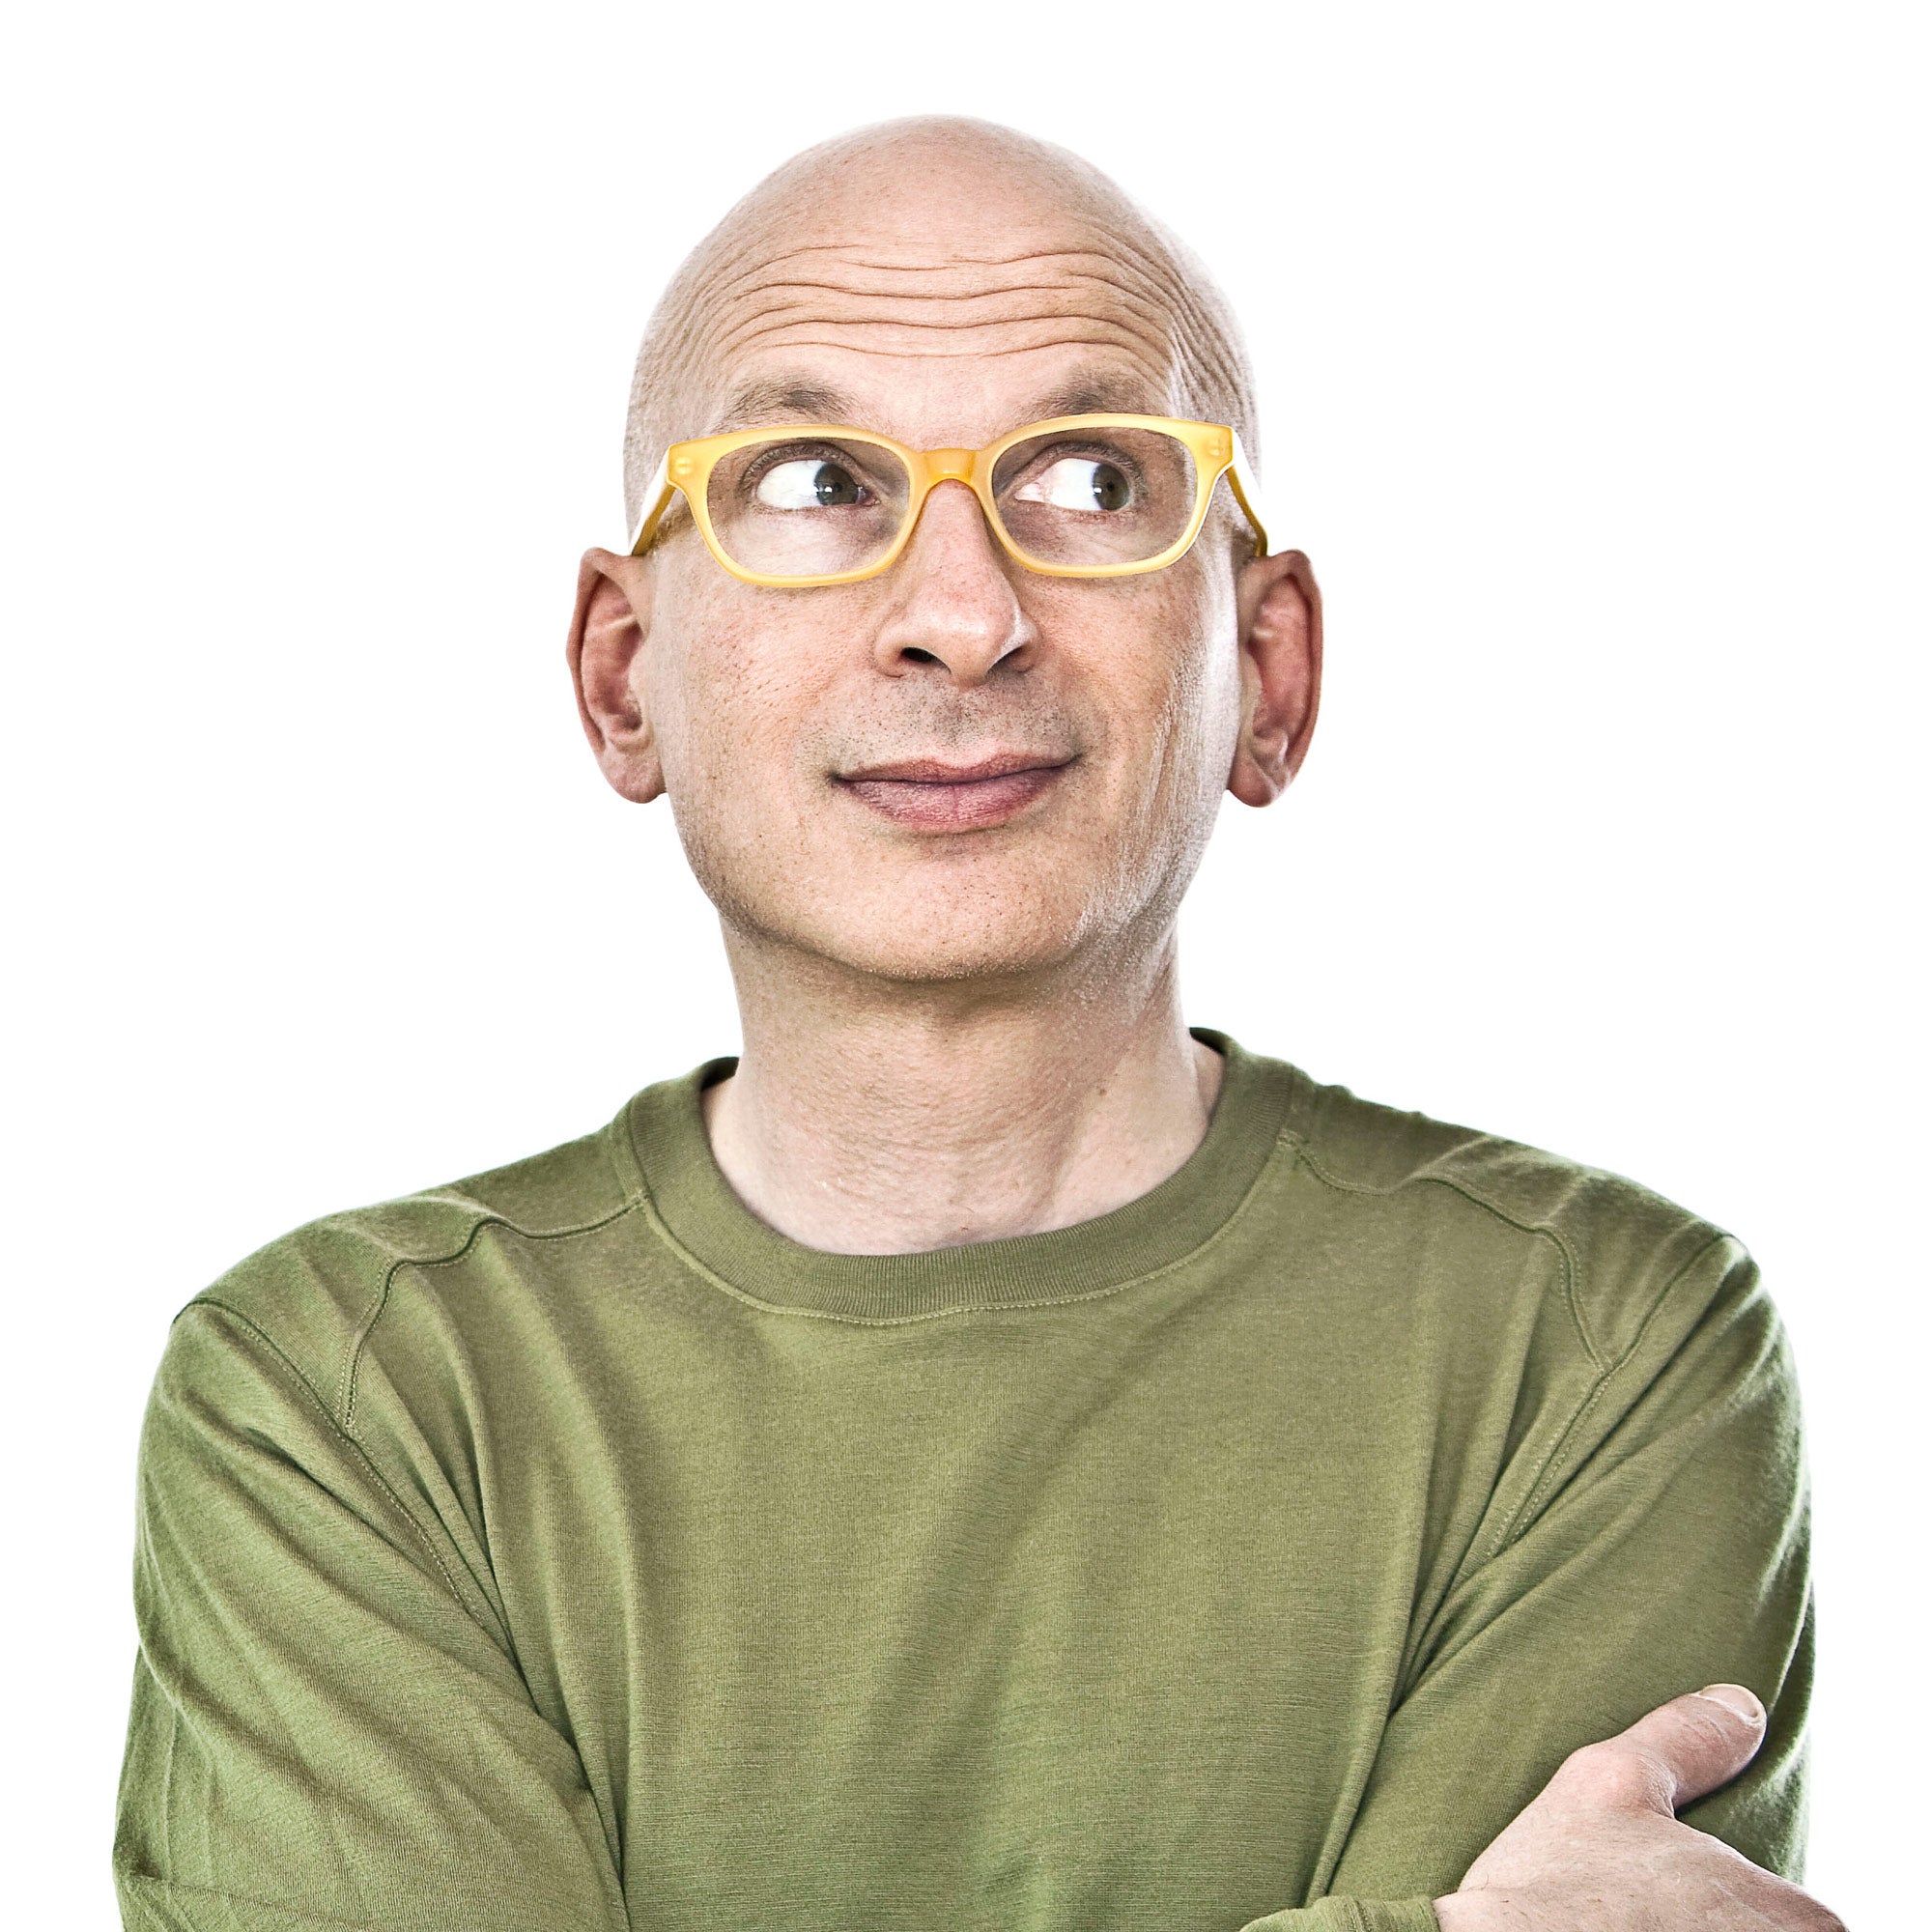 Seth Godin's 4 Early Career Mistakes That All Students Should Avoid